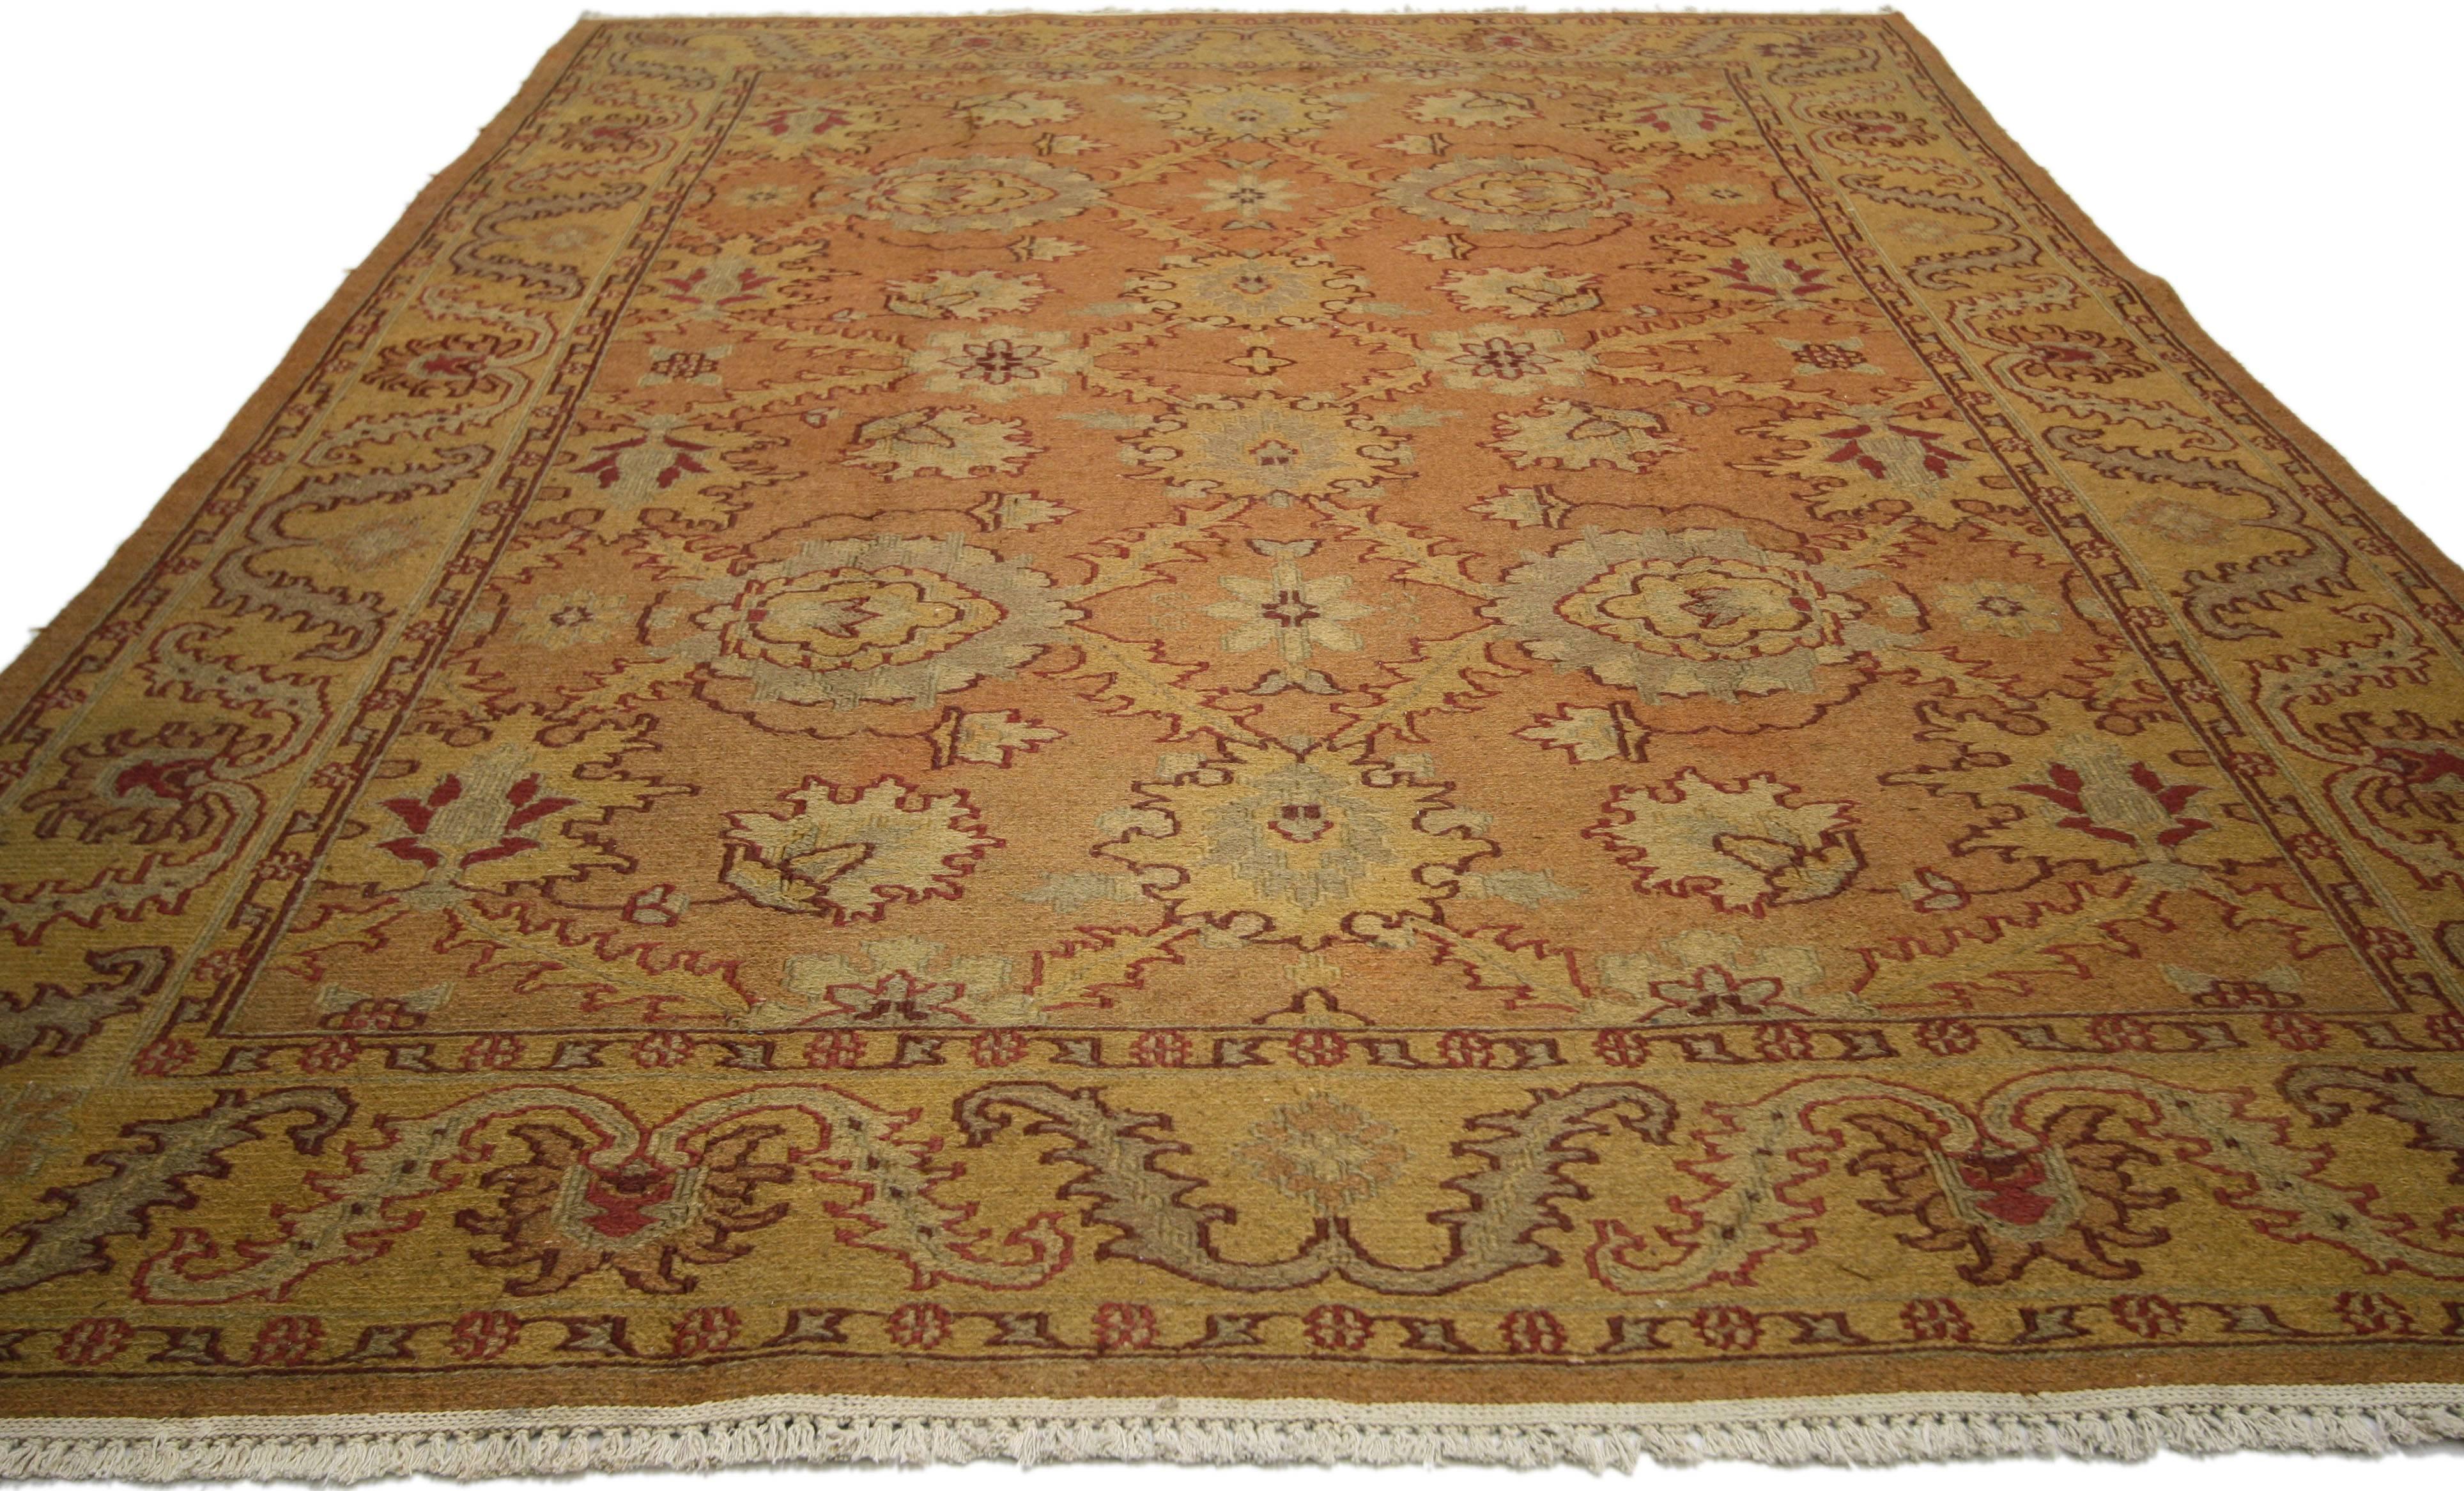 Spanish Colonial Vintage Chinese Rug with Soumak Design and Warm Arts & Crafts Style For Sale